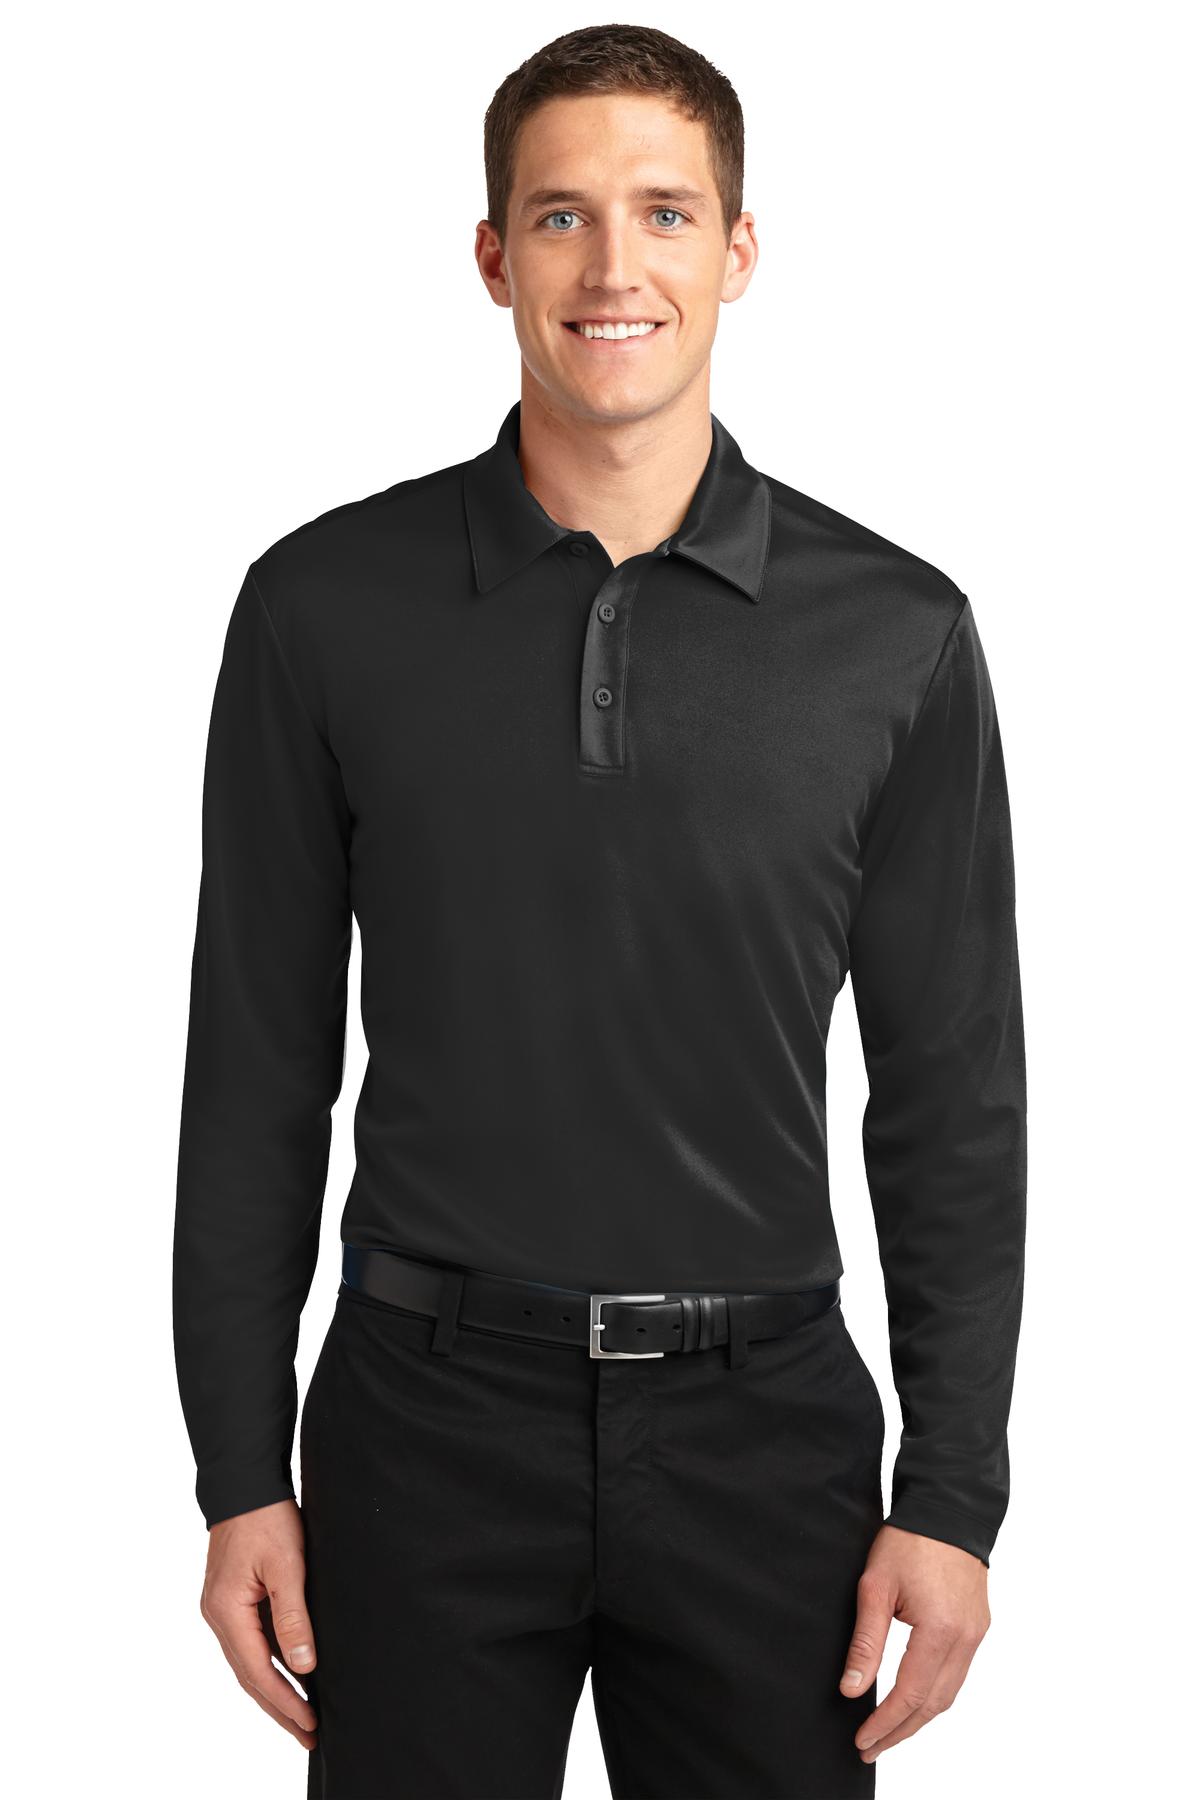 Silk Touch™ Performance Long Sleeve Polo. K540LS